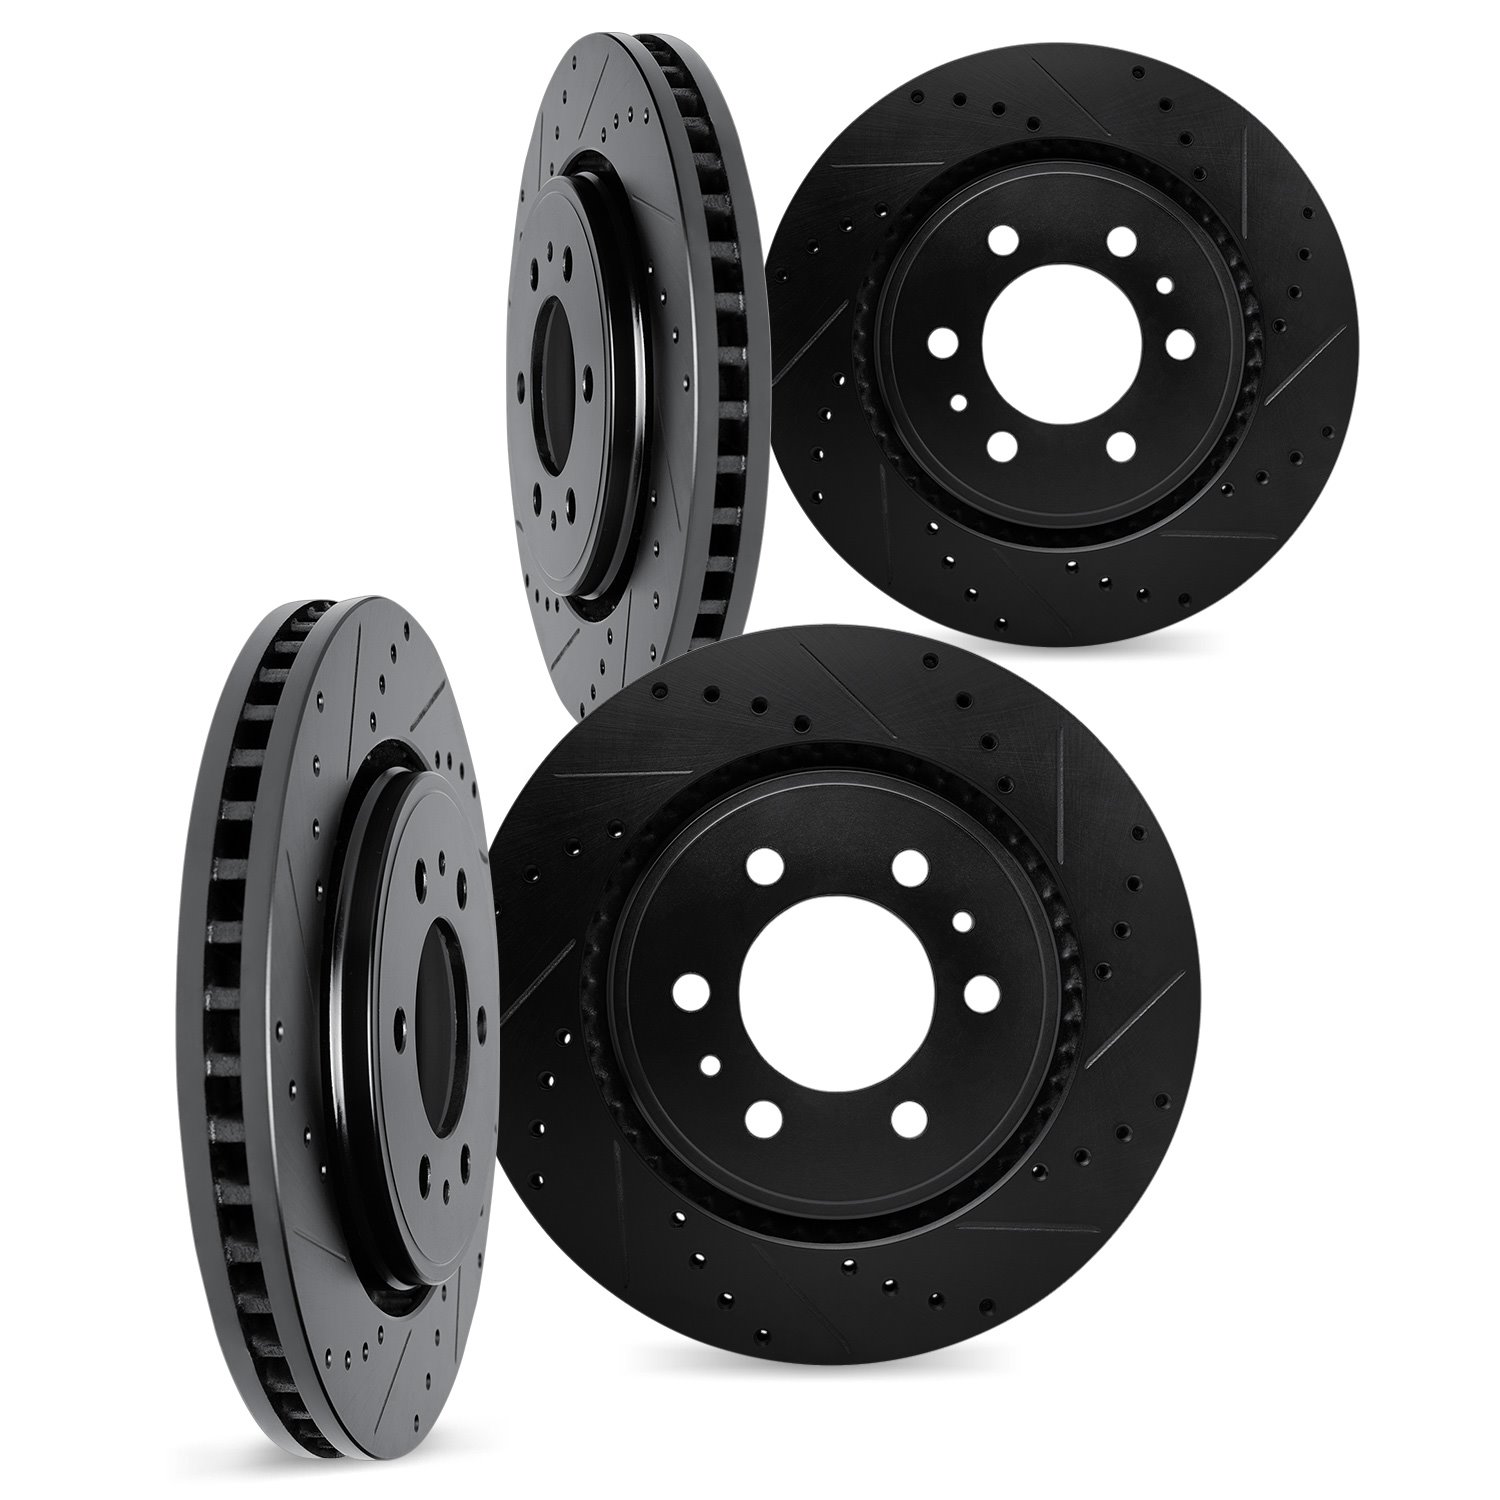 8004-92036 Drilled/Slotted Brake Rotors [Black], 2008-2014 Mitsubishi, Position: Front and Rear